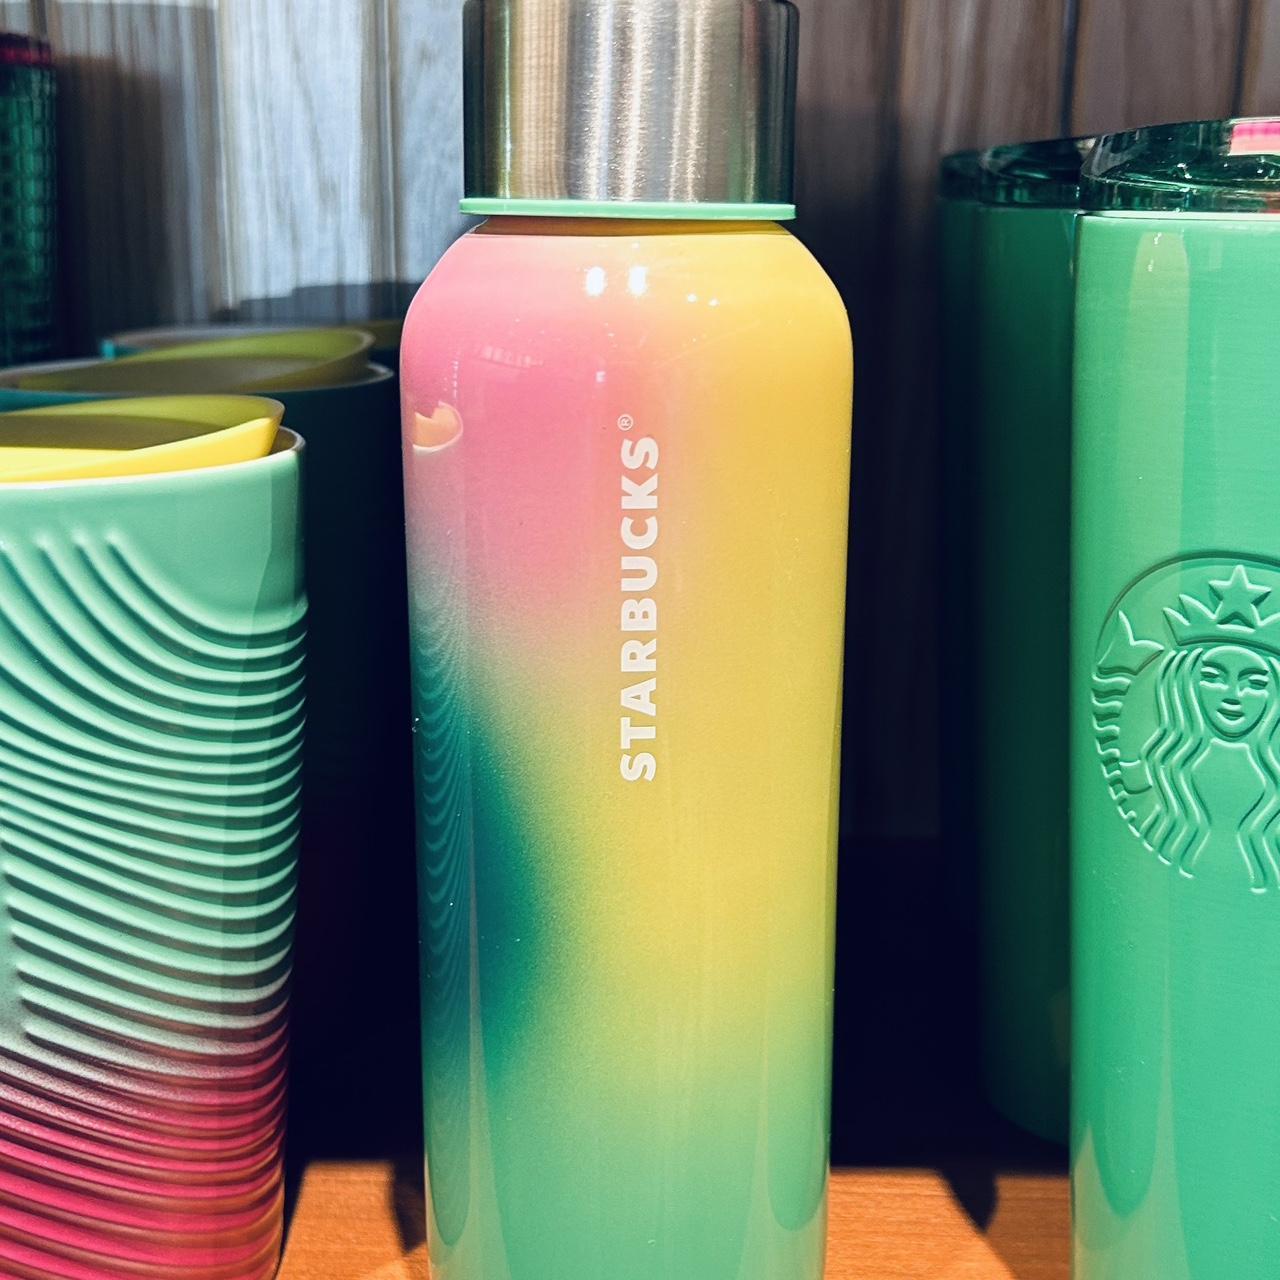 See Starbucks's Recycled Glass Cups and Water Bottles